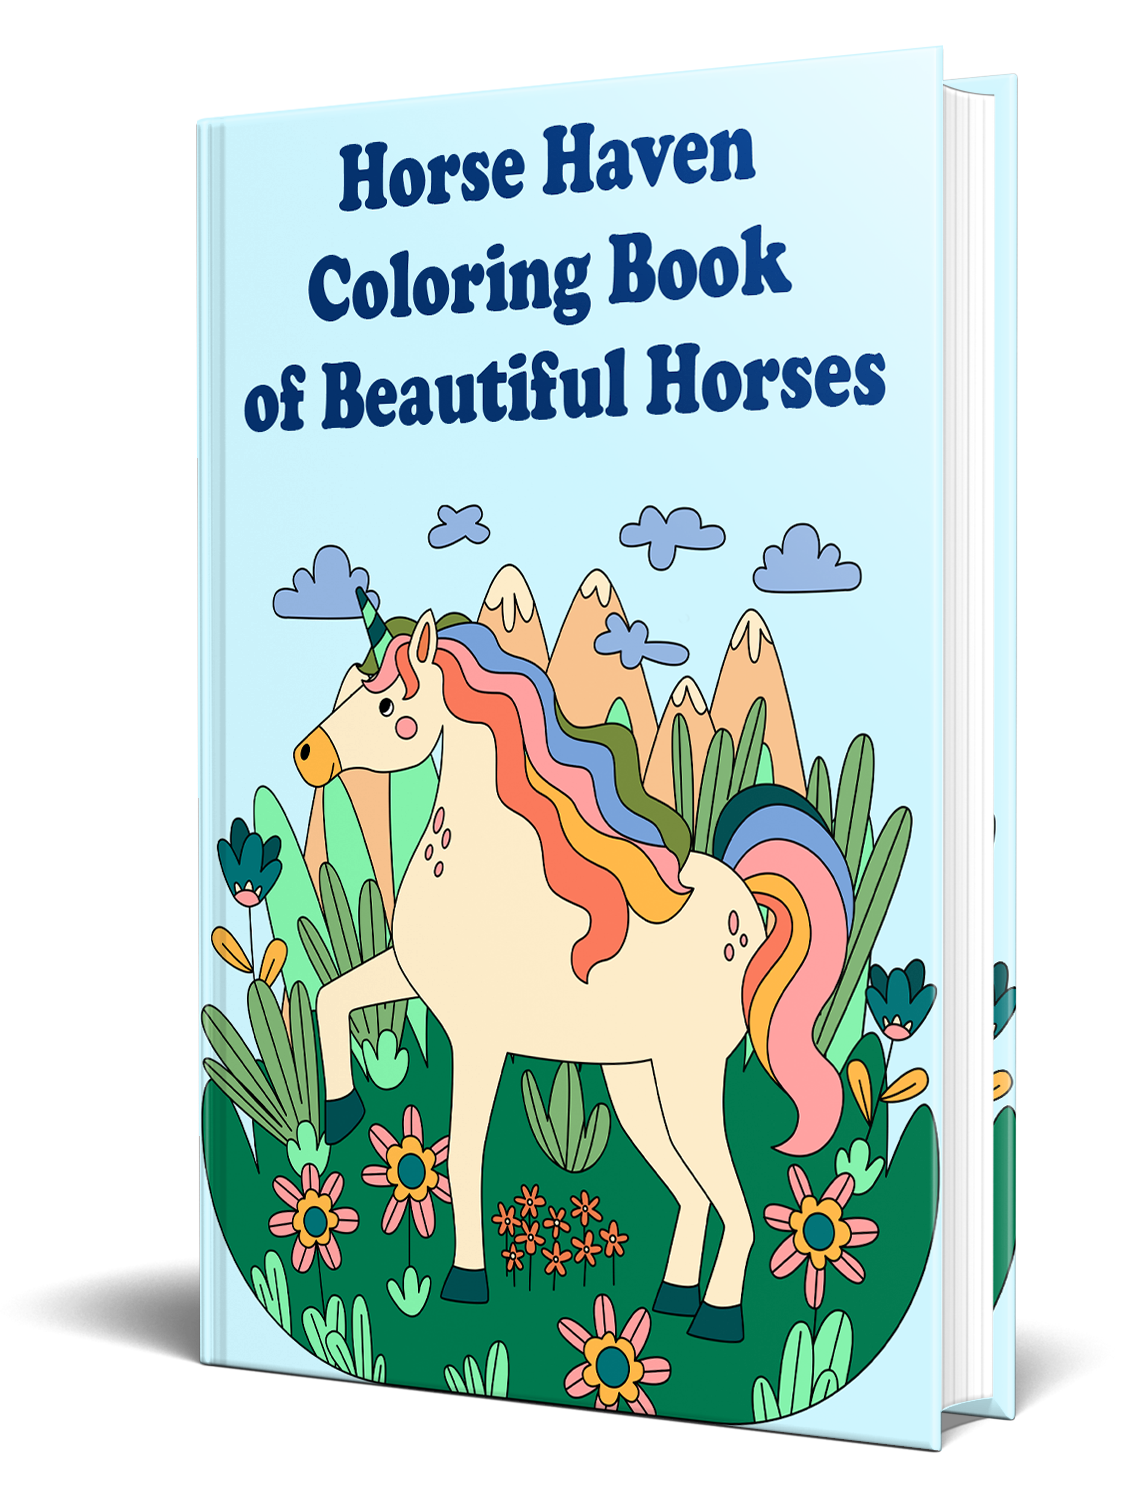 Horse Haven Coloring Book of Beautiful Horses